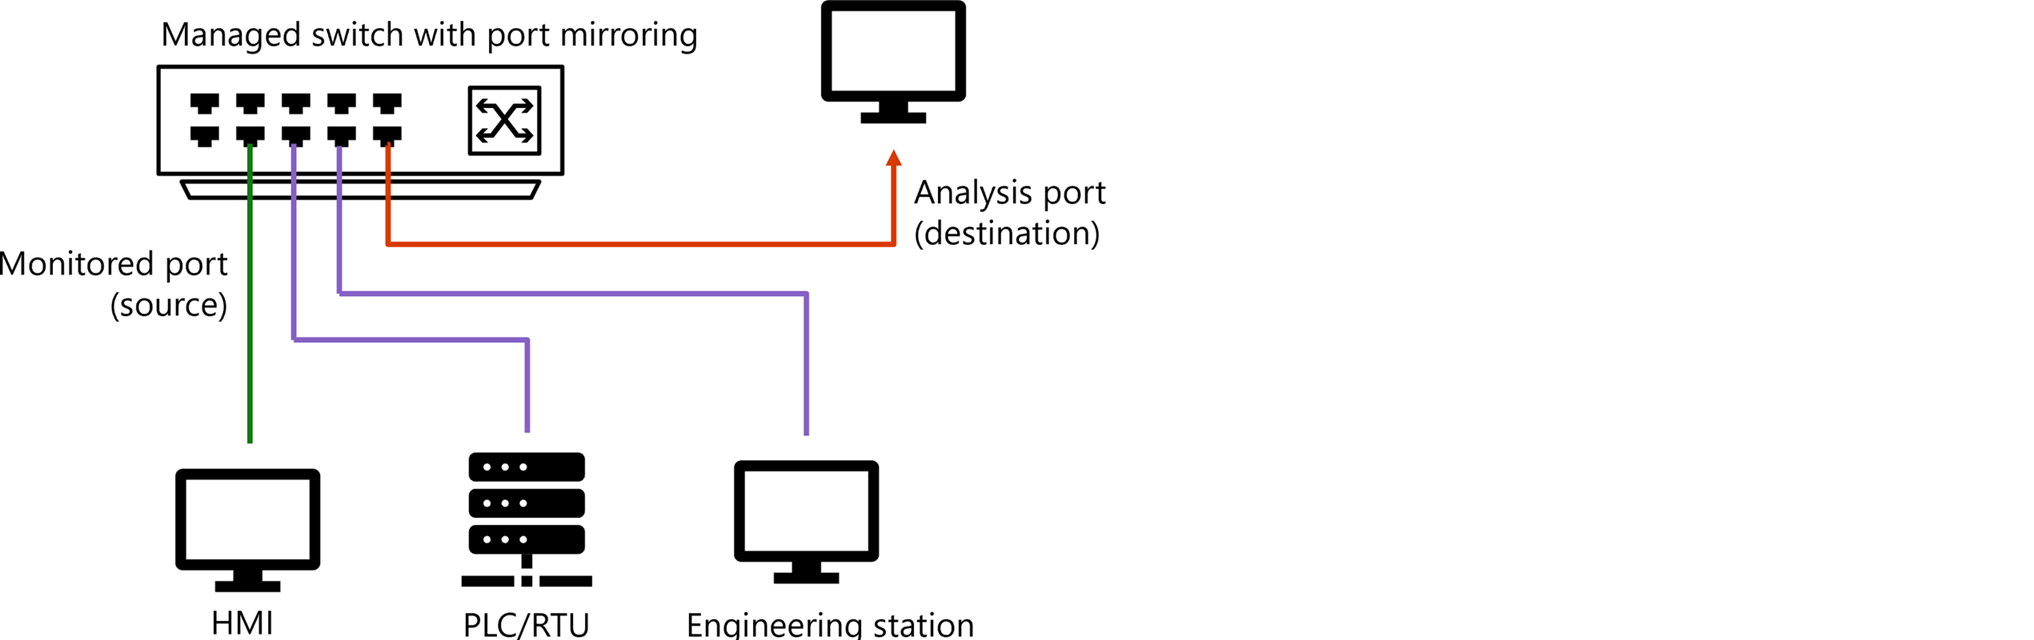 Diagram of a managed switch with port mirroring.